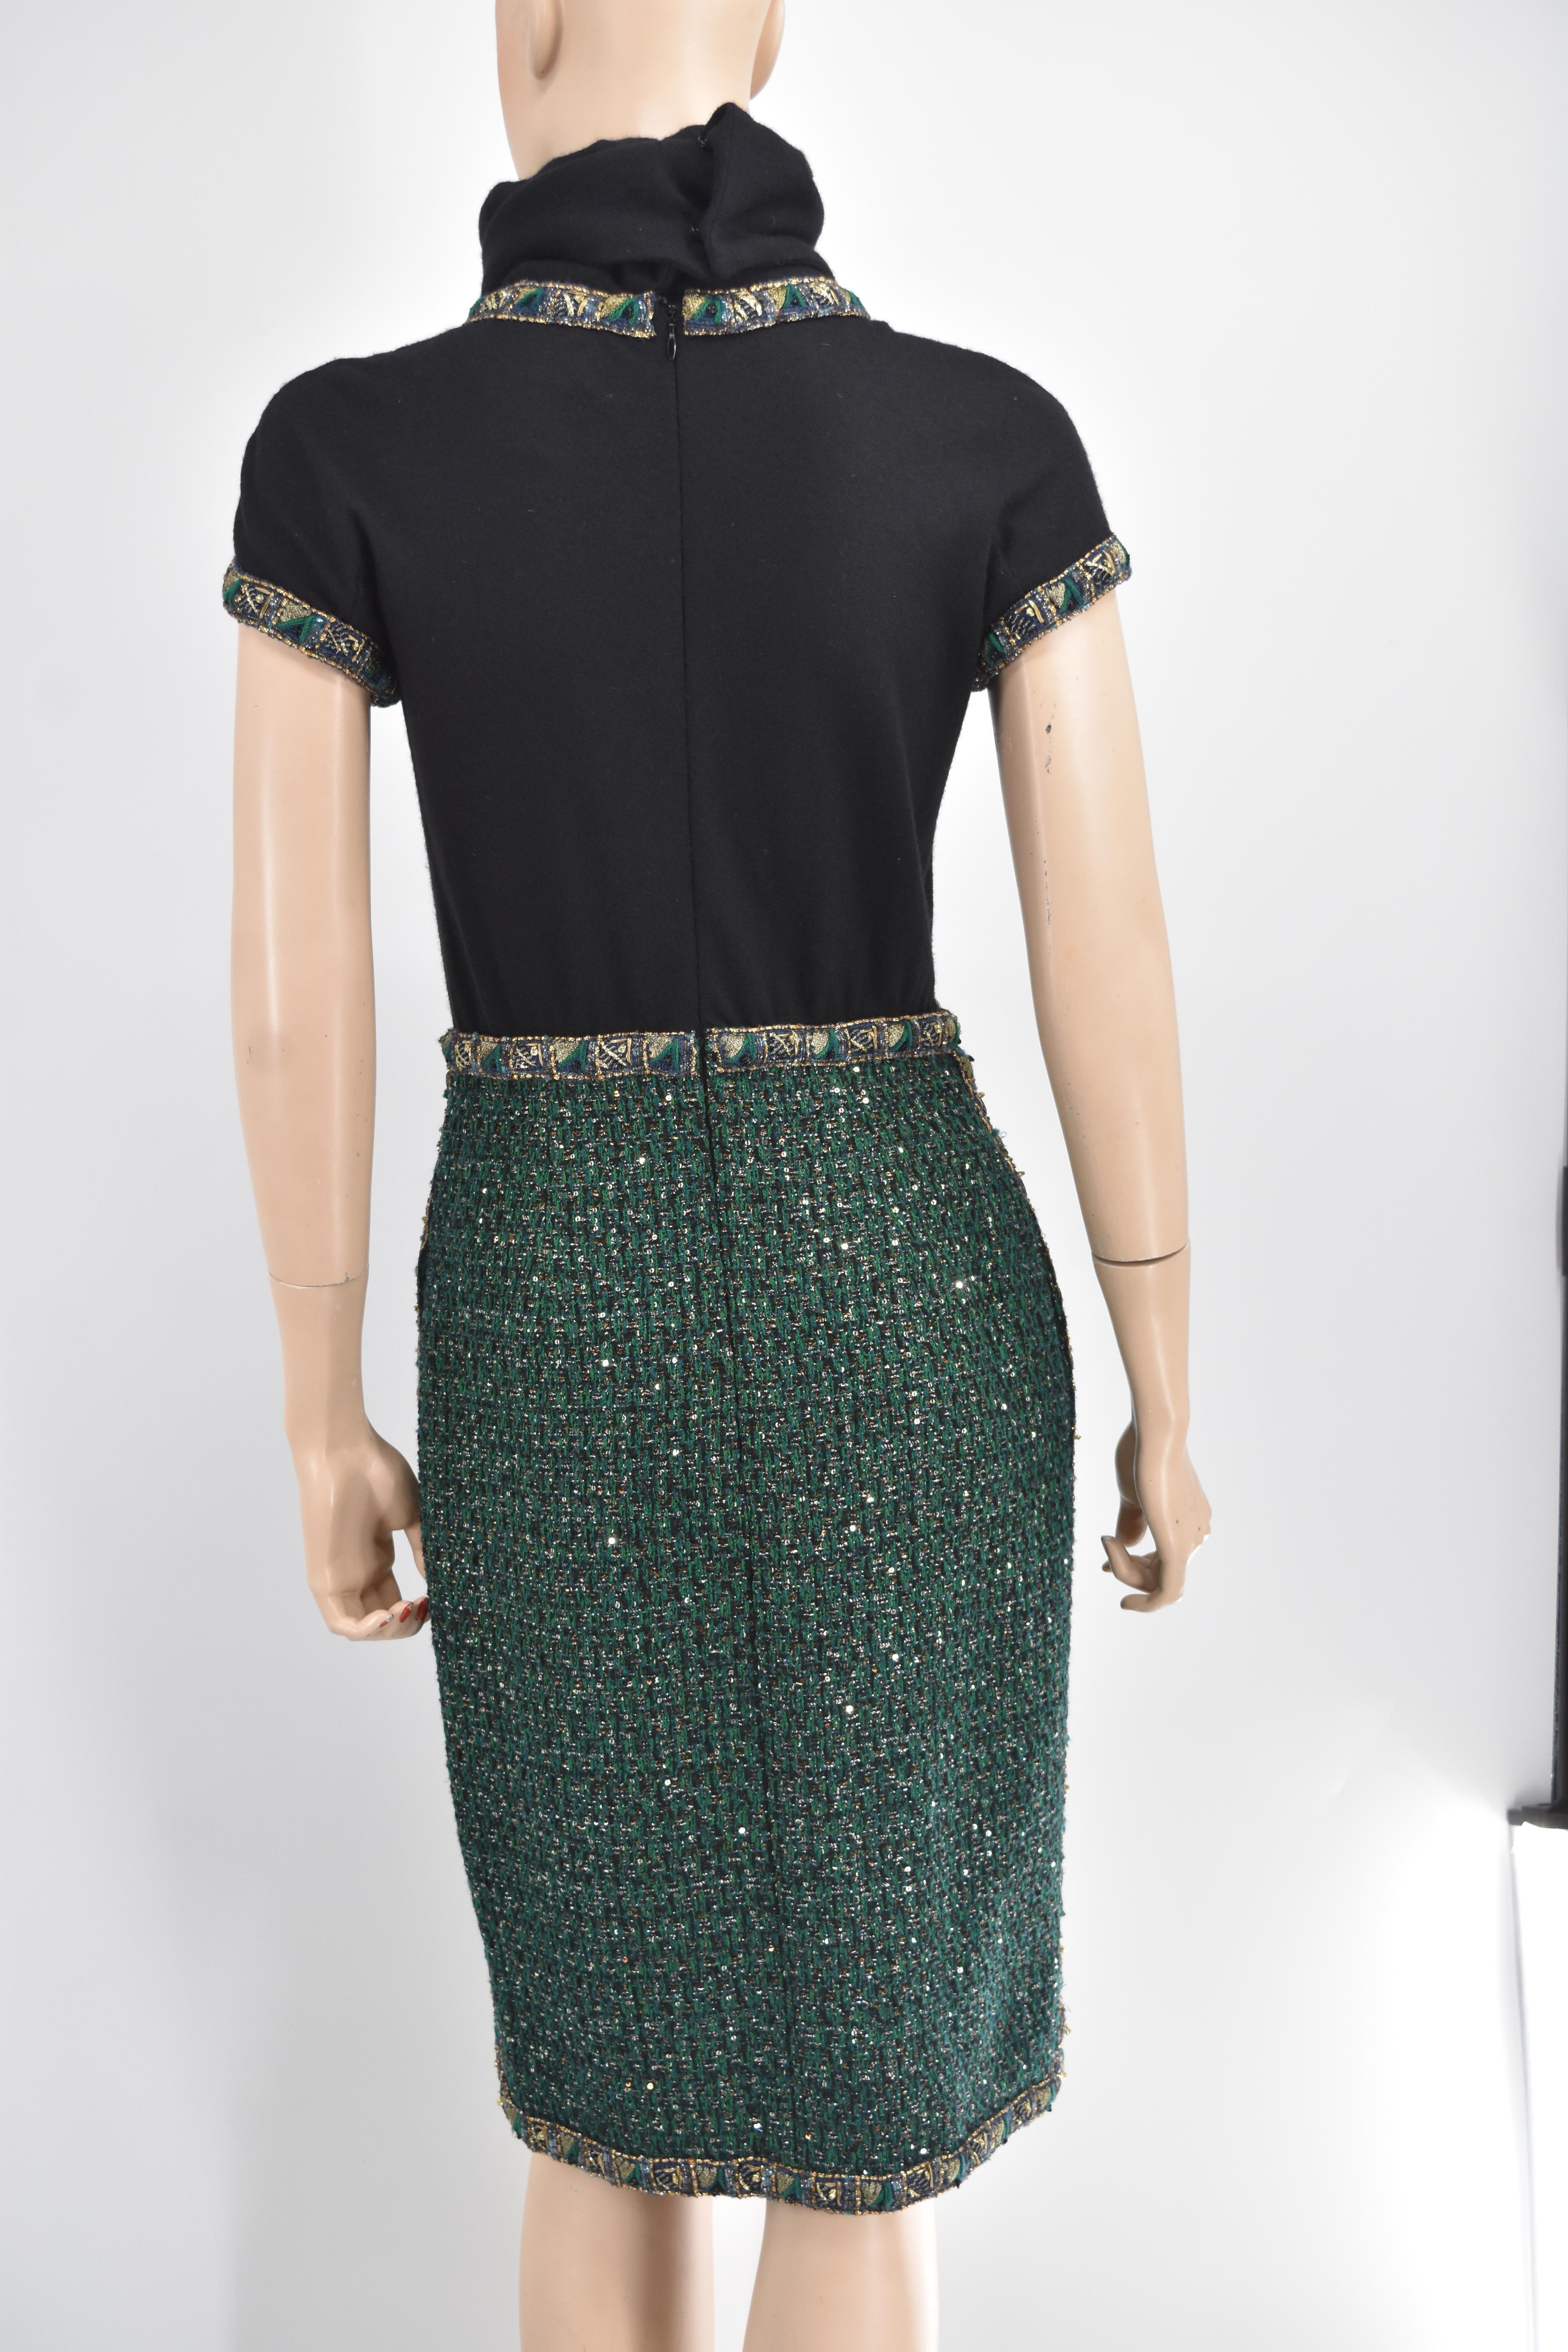 Women's or Men's Chanel NWT 11A Fall 2011 Tweed Runway Dress 42 New For Sale